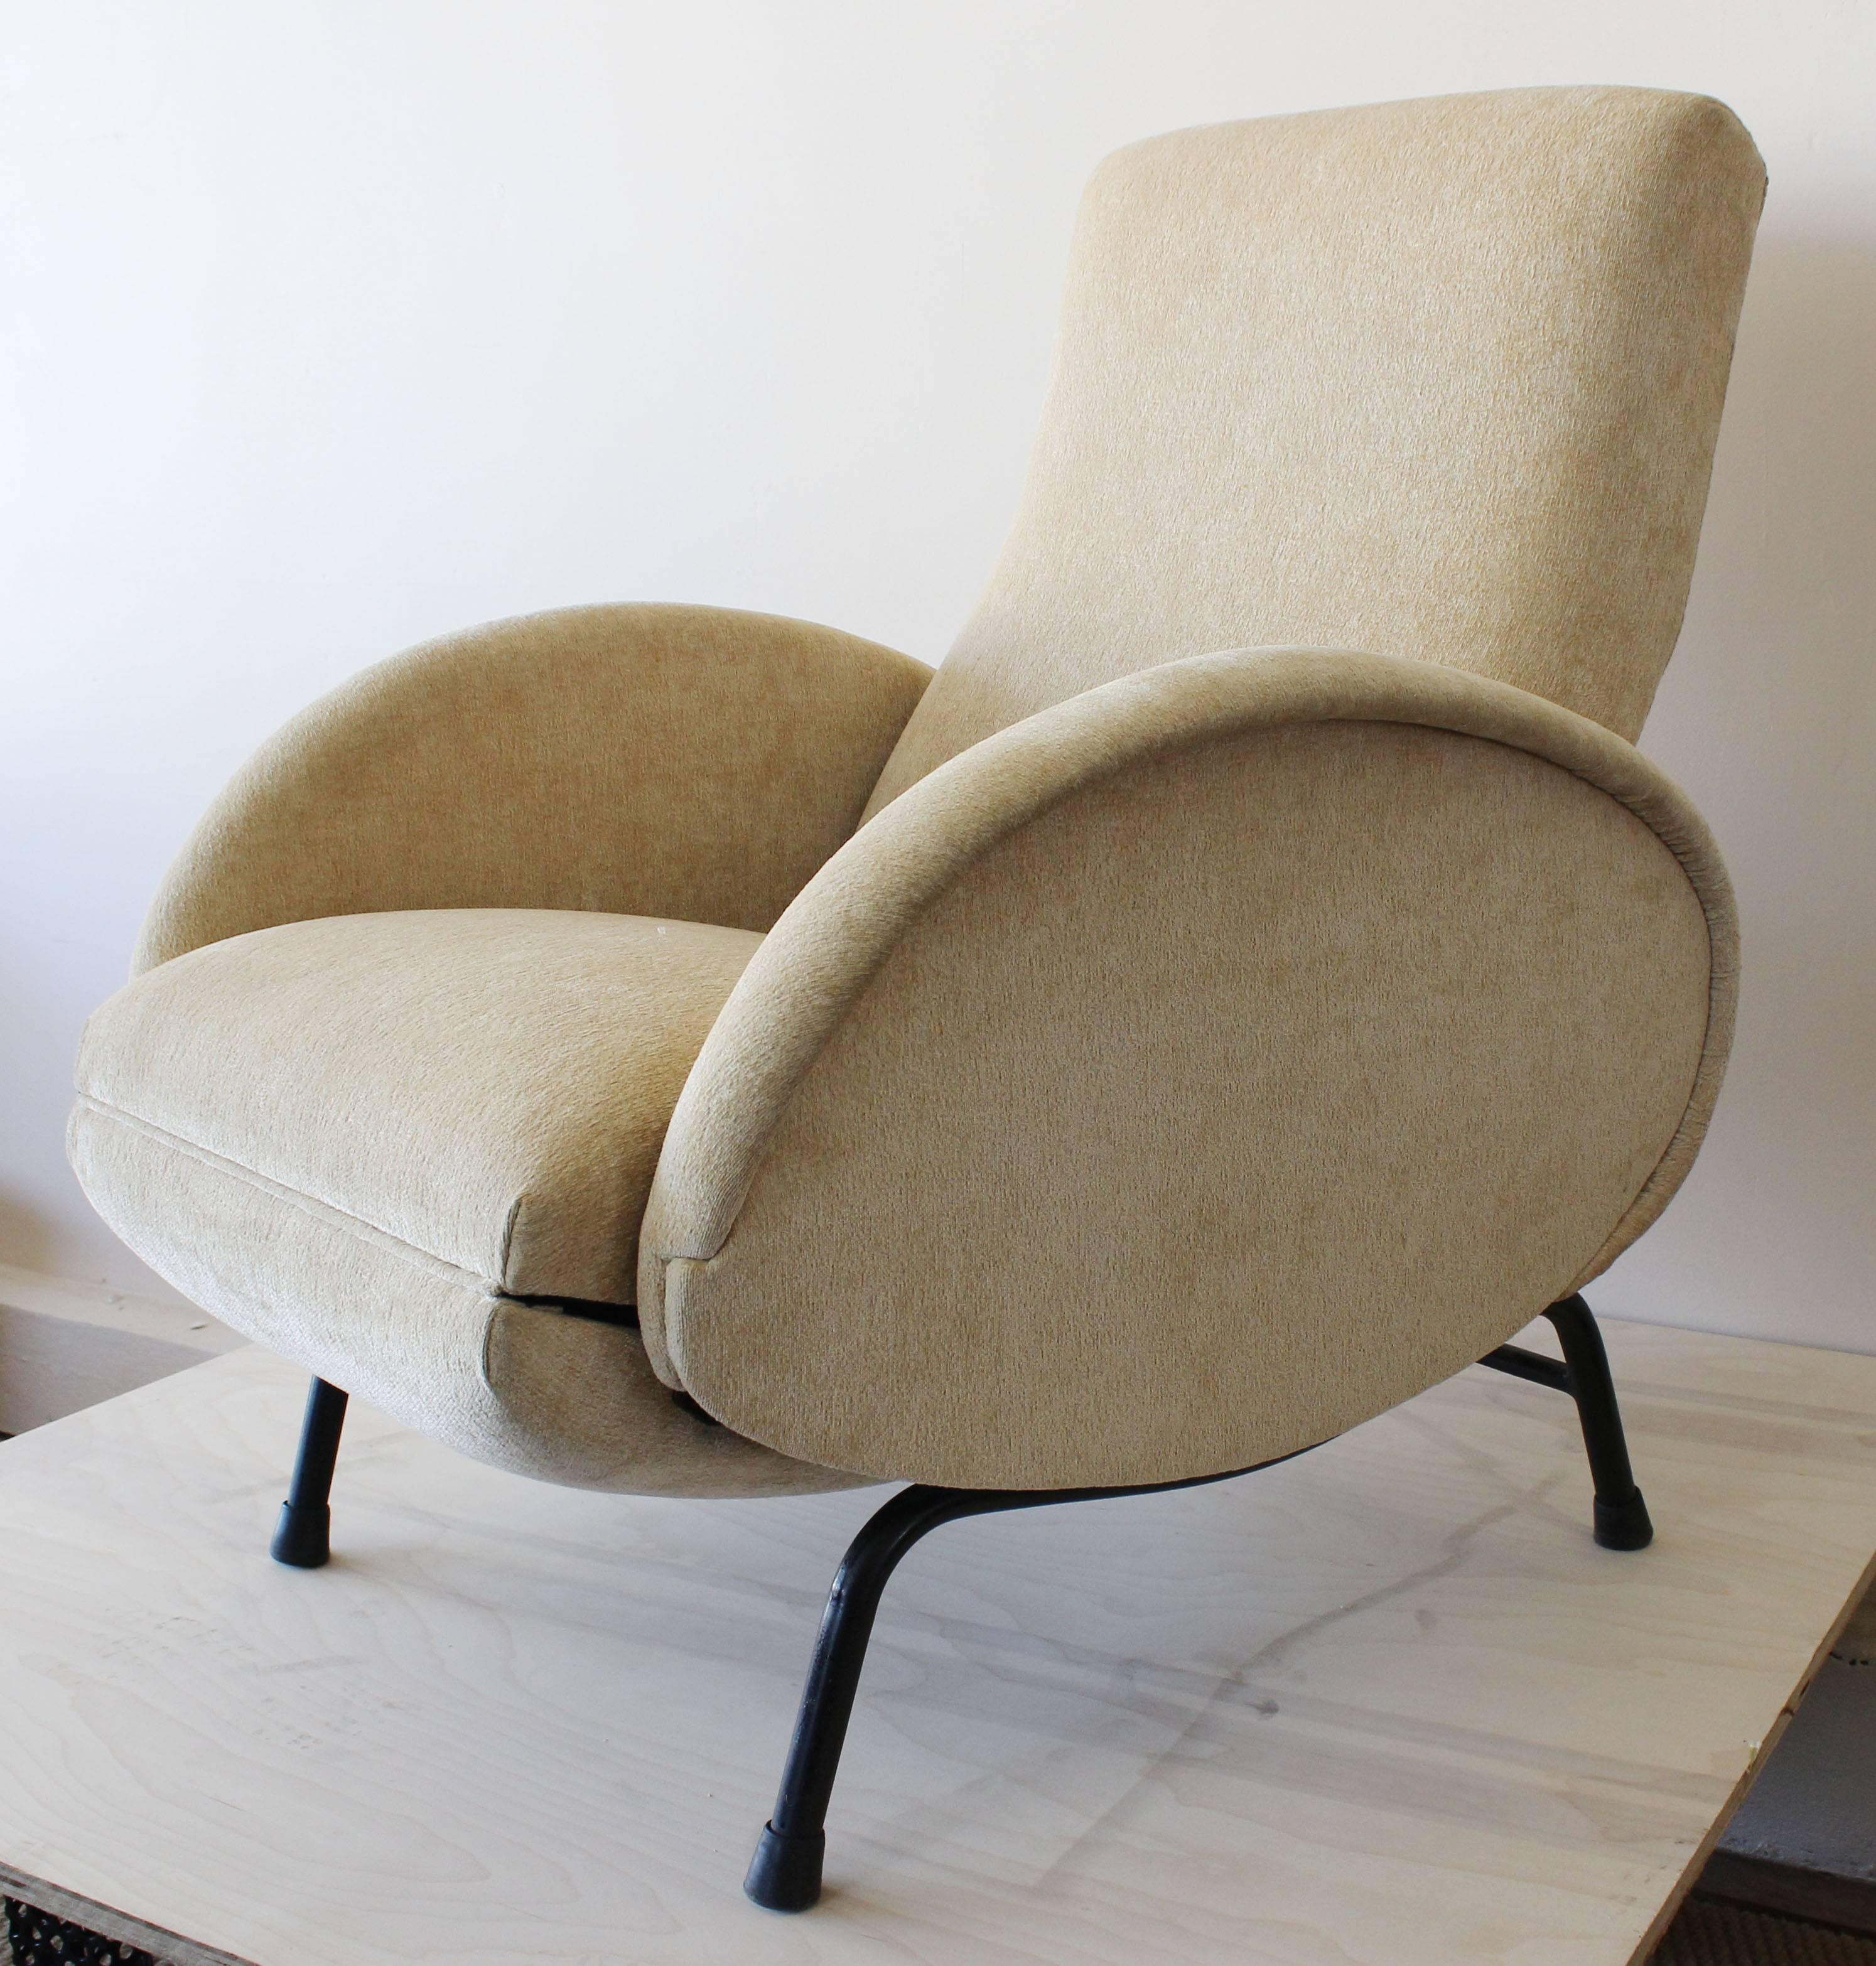 A Mid-Century Italian armchair with metal base and vintage upholstery by Poltronissima Dormiveglia. Opens to 63 inches.